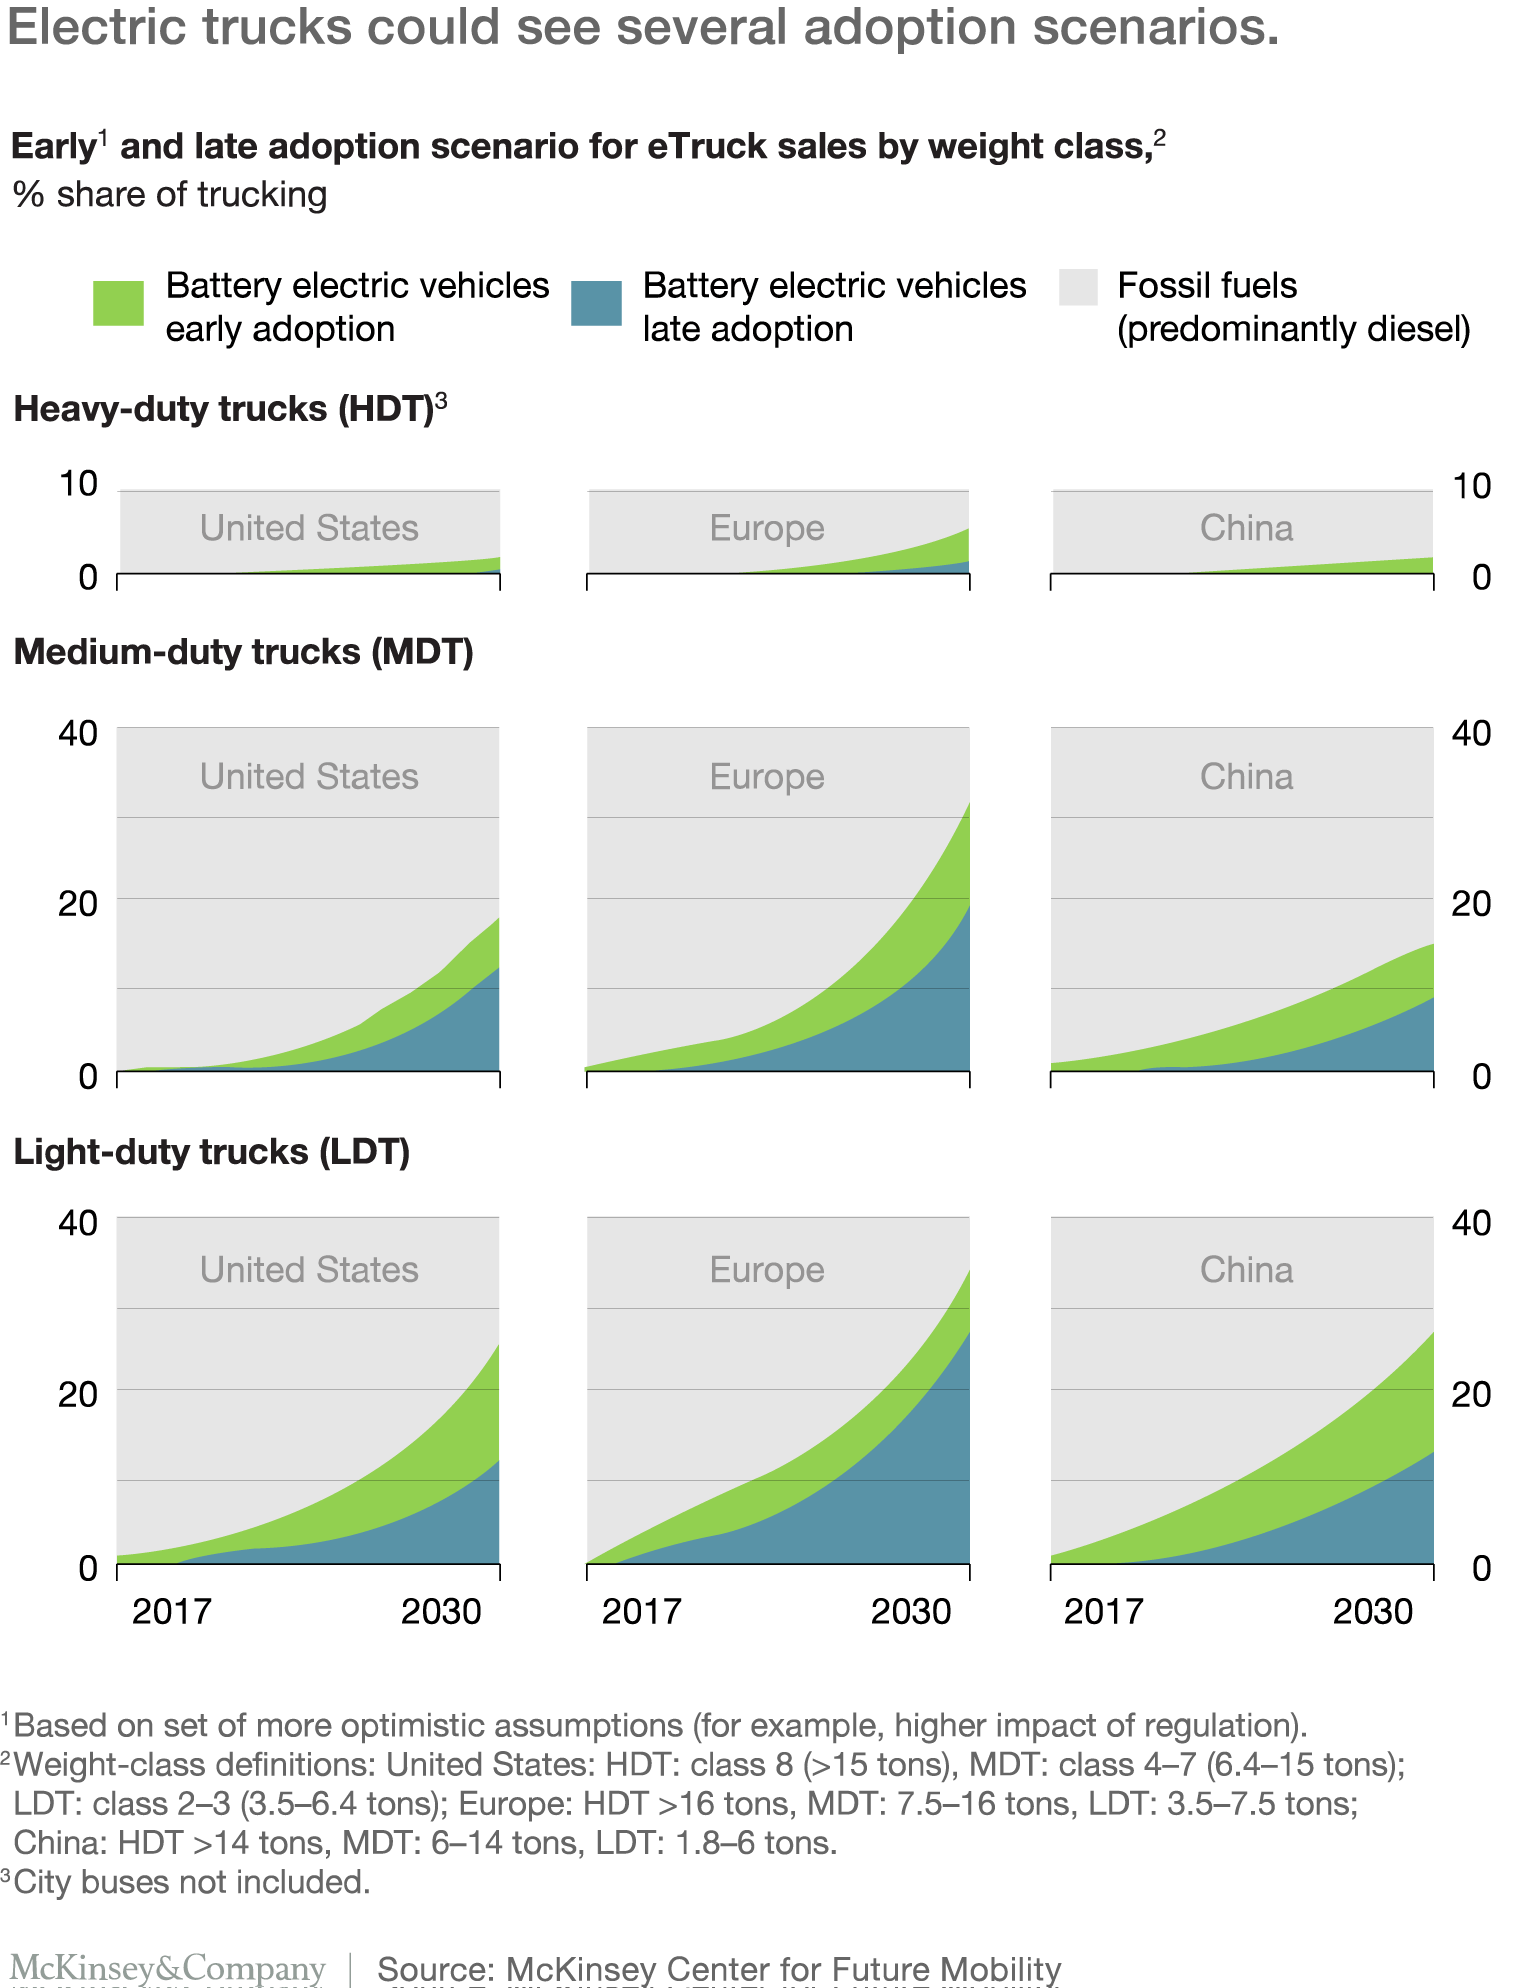 adoption scenarios for electric trucks in 3 weight classes in Europe, US, and China through 2030